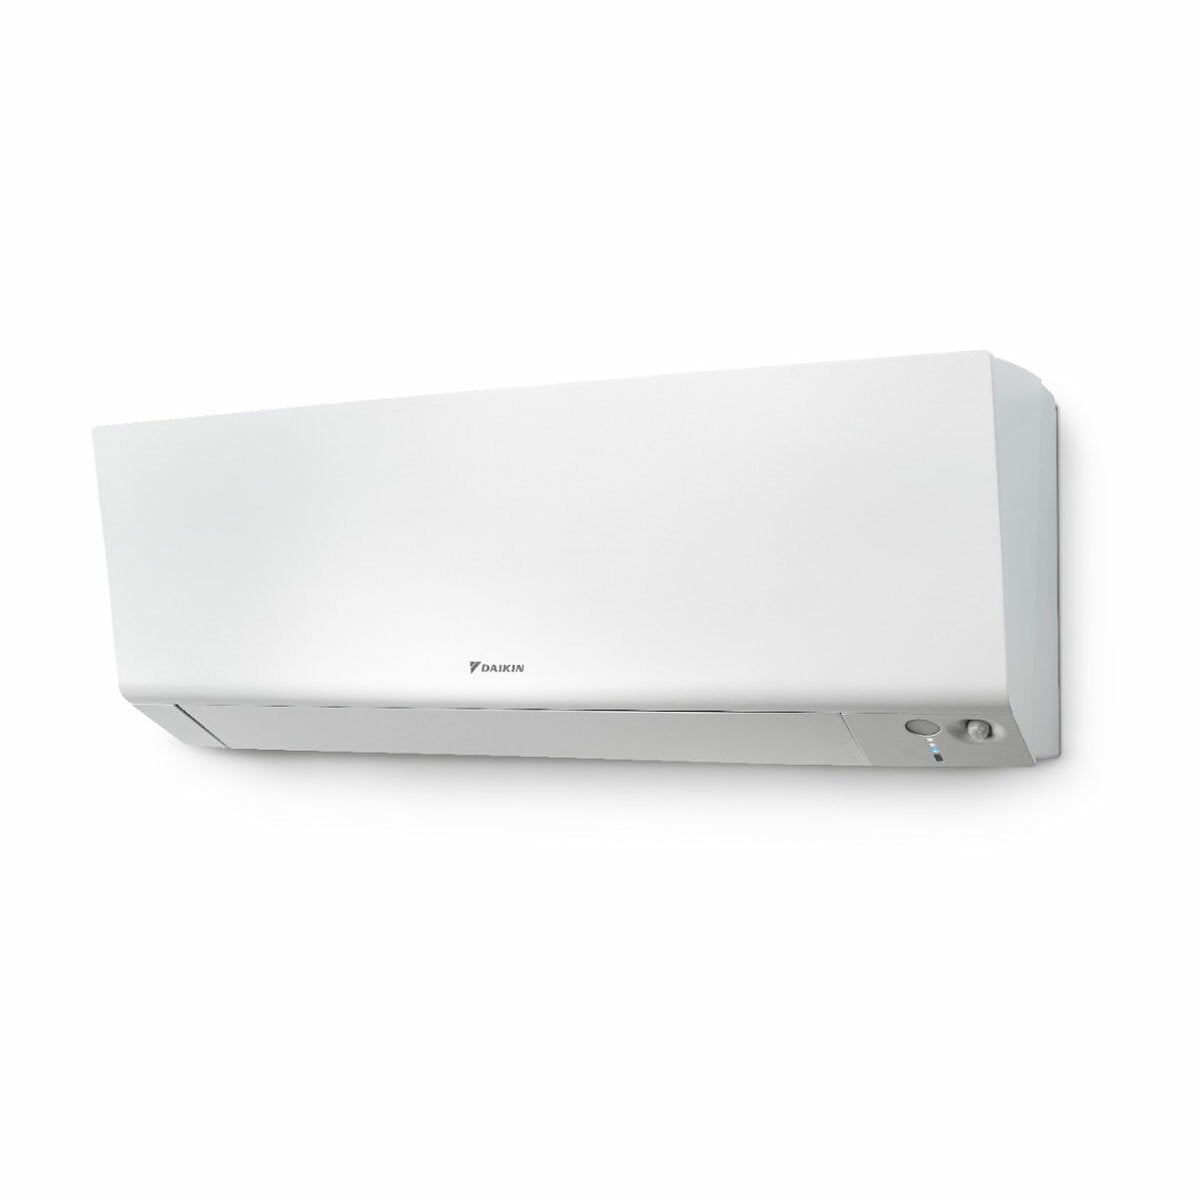 Daikin Perfera Wall indoor unit 21000 BTU R32 gas inverter air conditioner with integrated wi-fi